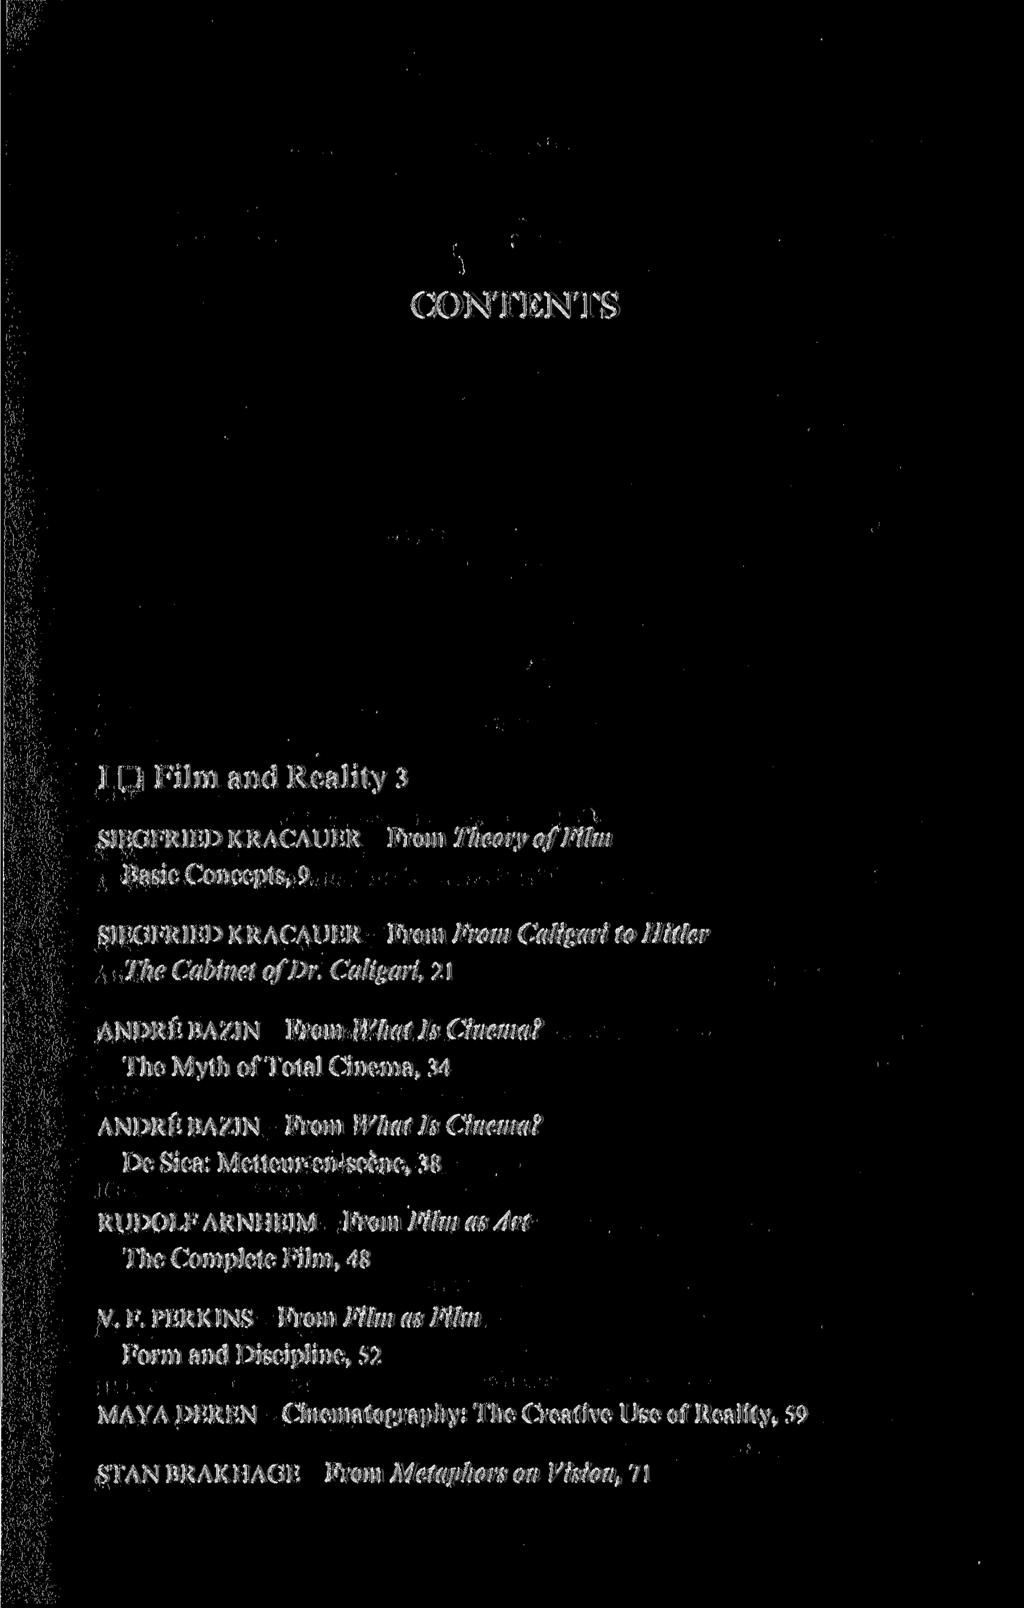 CONTENTS I Film and Reality 3 SIEGFRIED KRACAUER From Theory of Film Basic Concepts, 9 SIEGFRIED KRACAUER From From Caligari to Hitler The Cabinet ofdr.